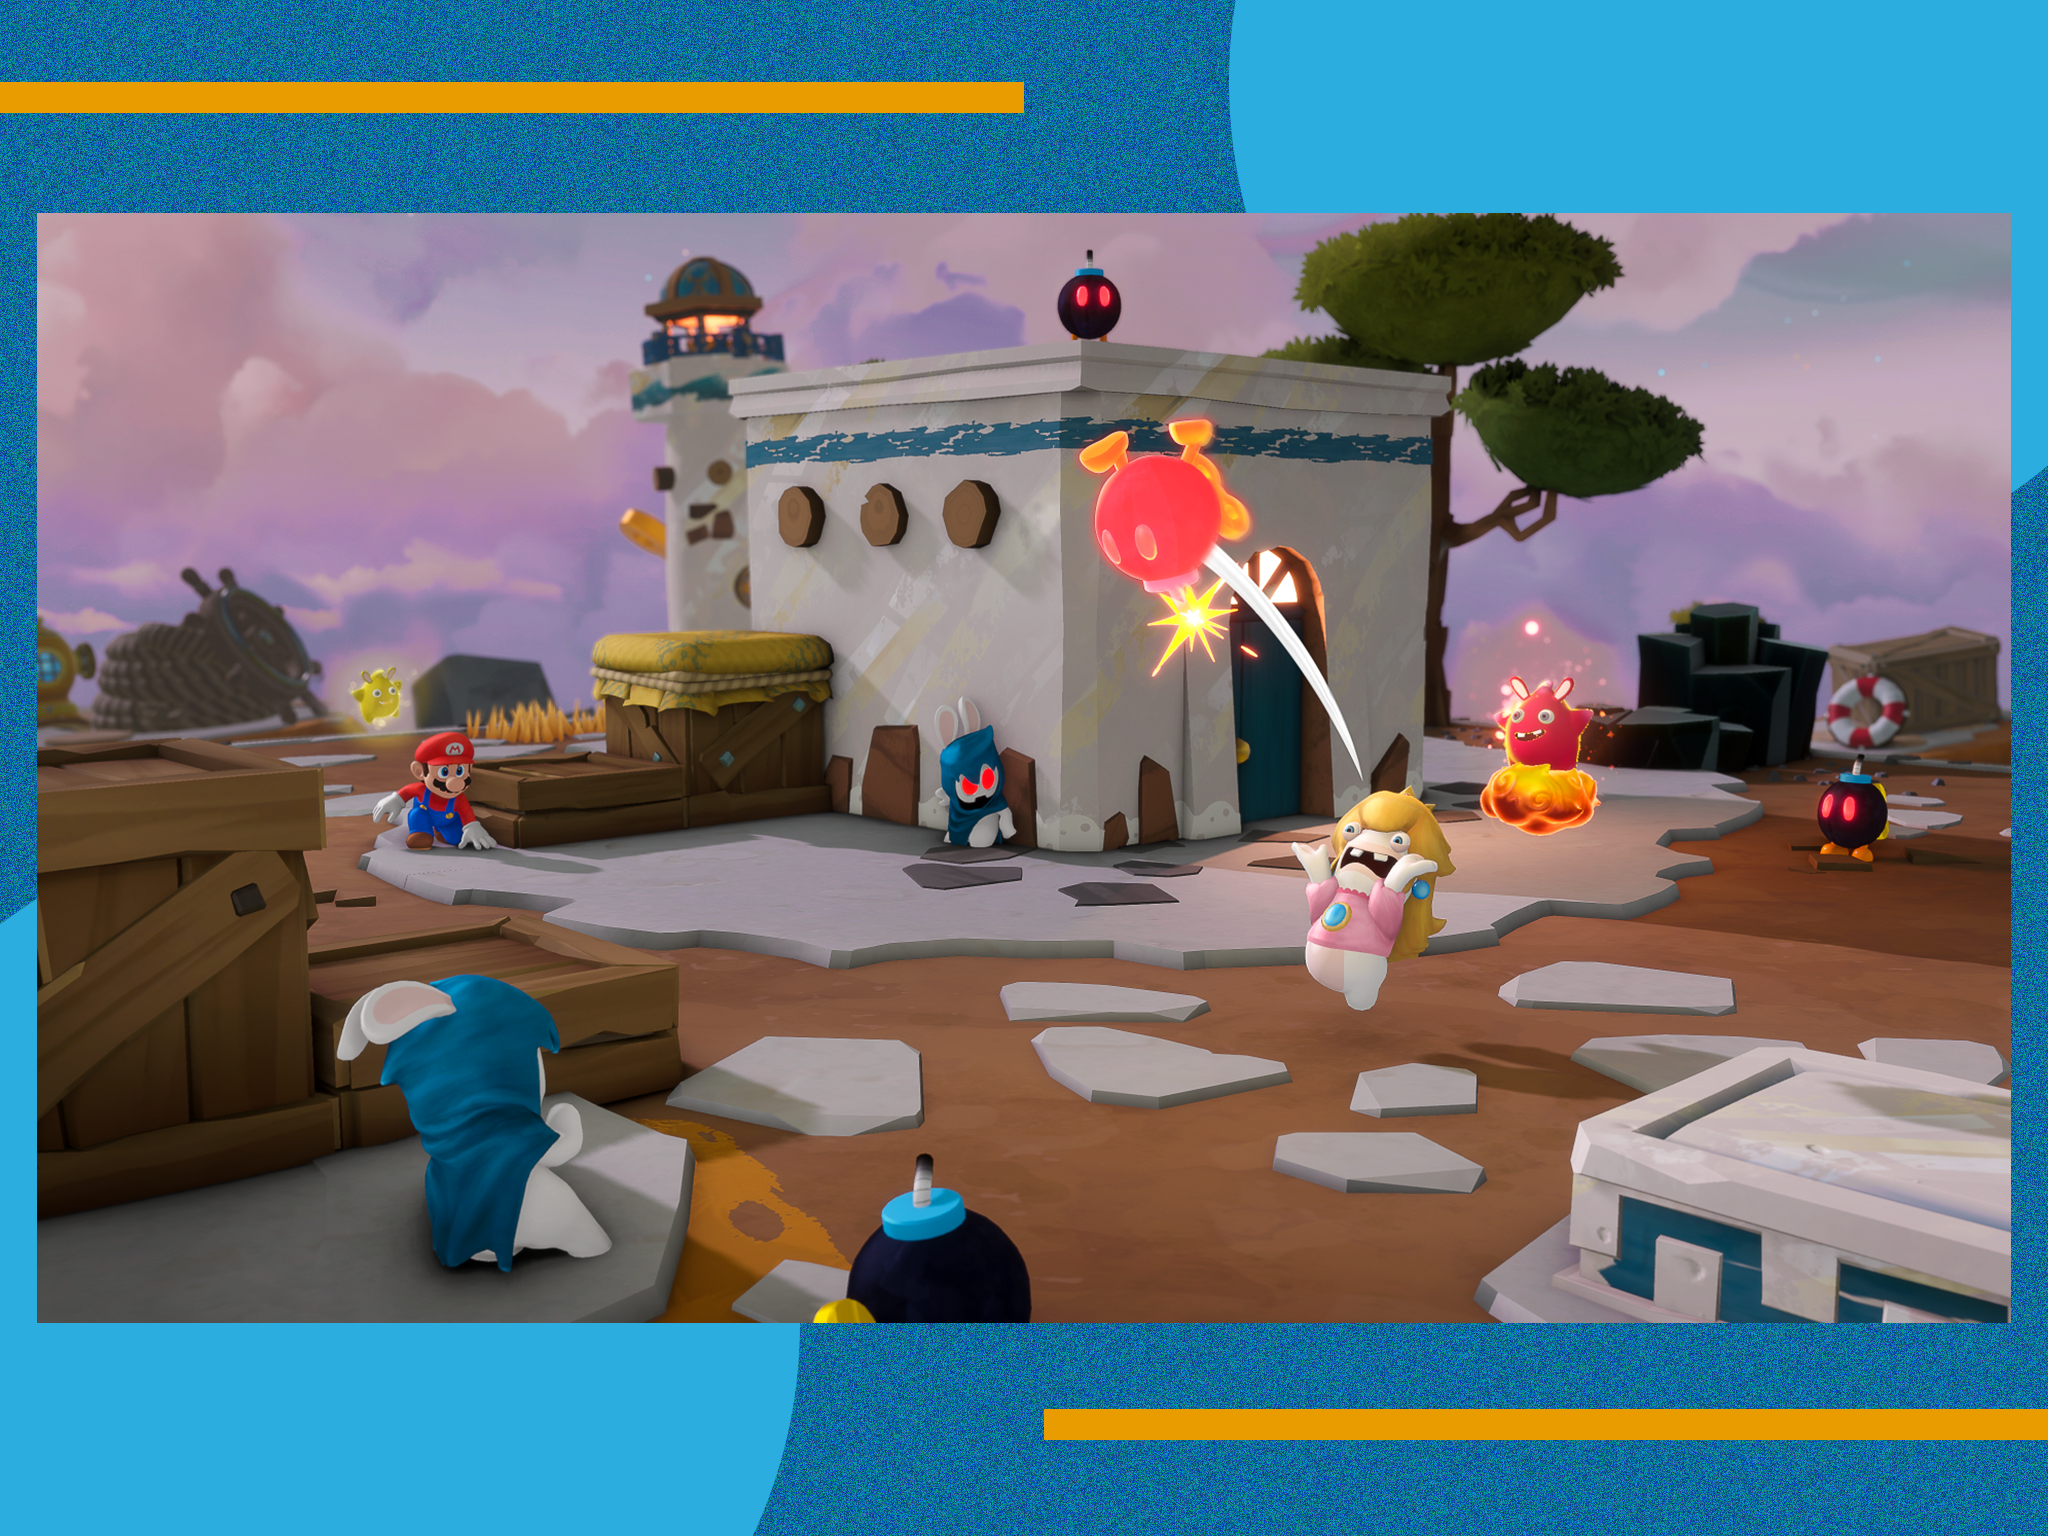 Mario + Rabbids Sparks of Hope: Full hands-on preview